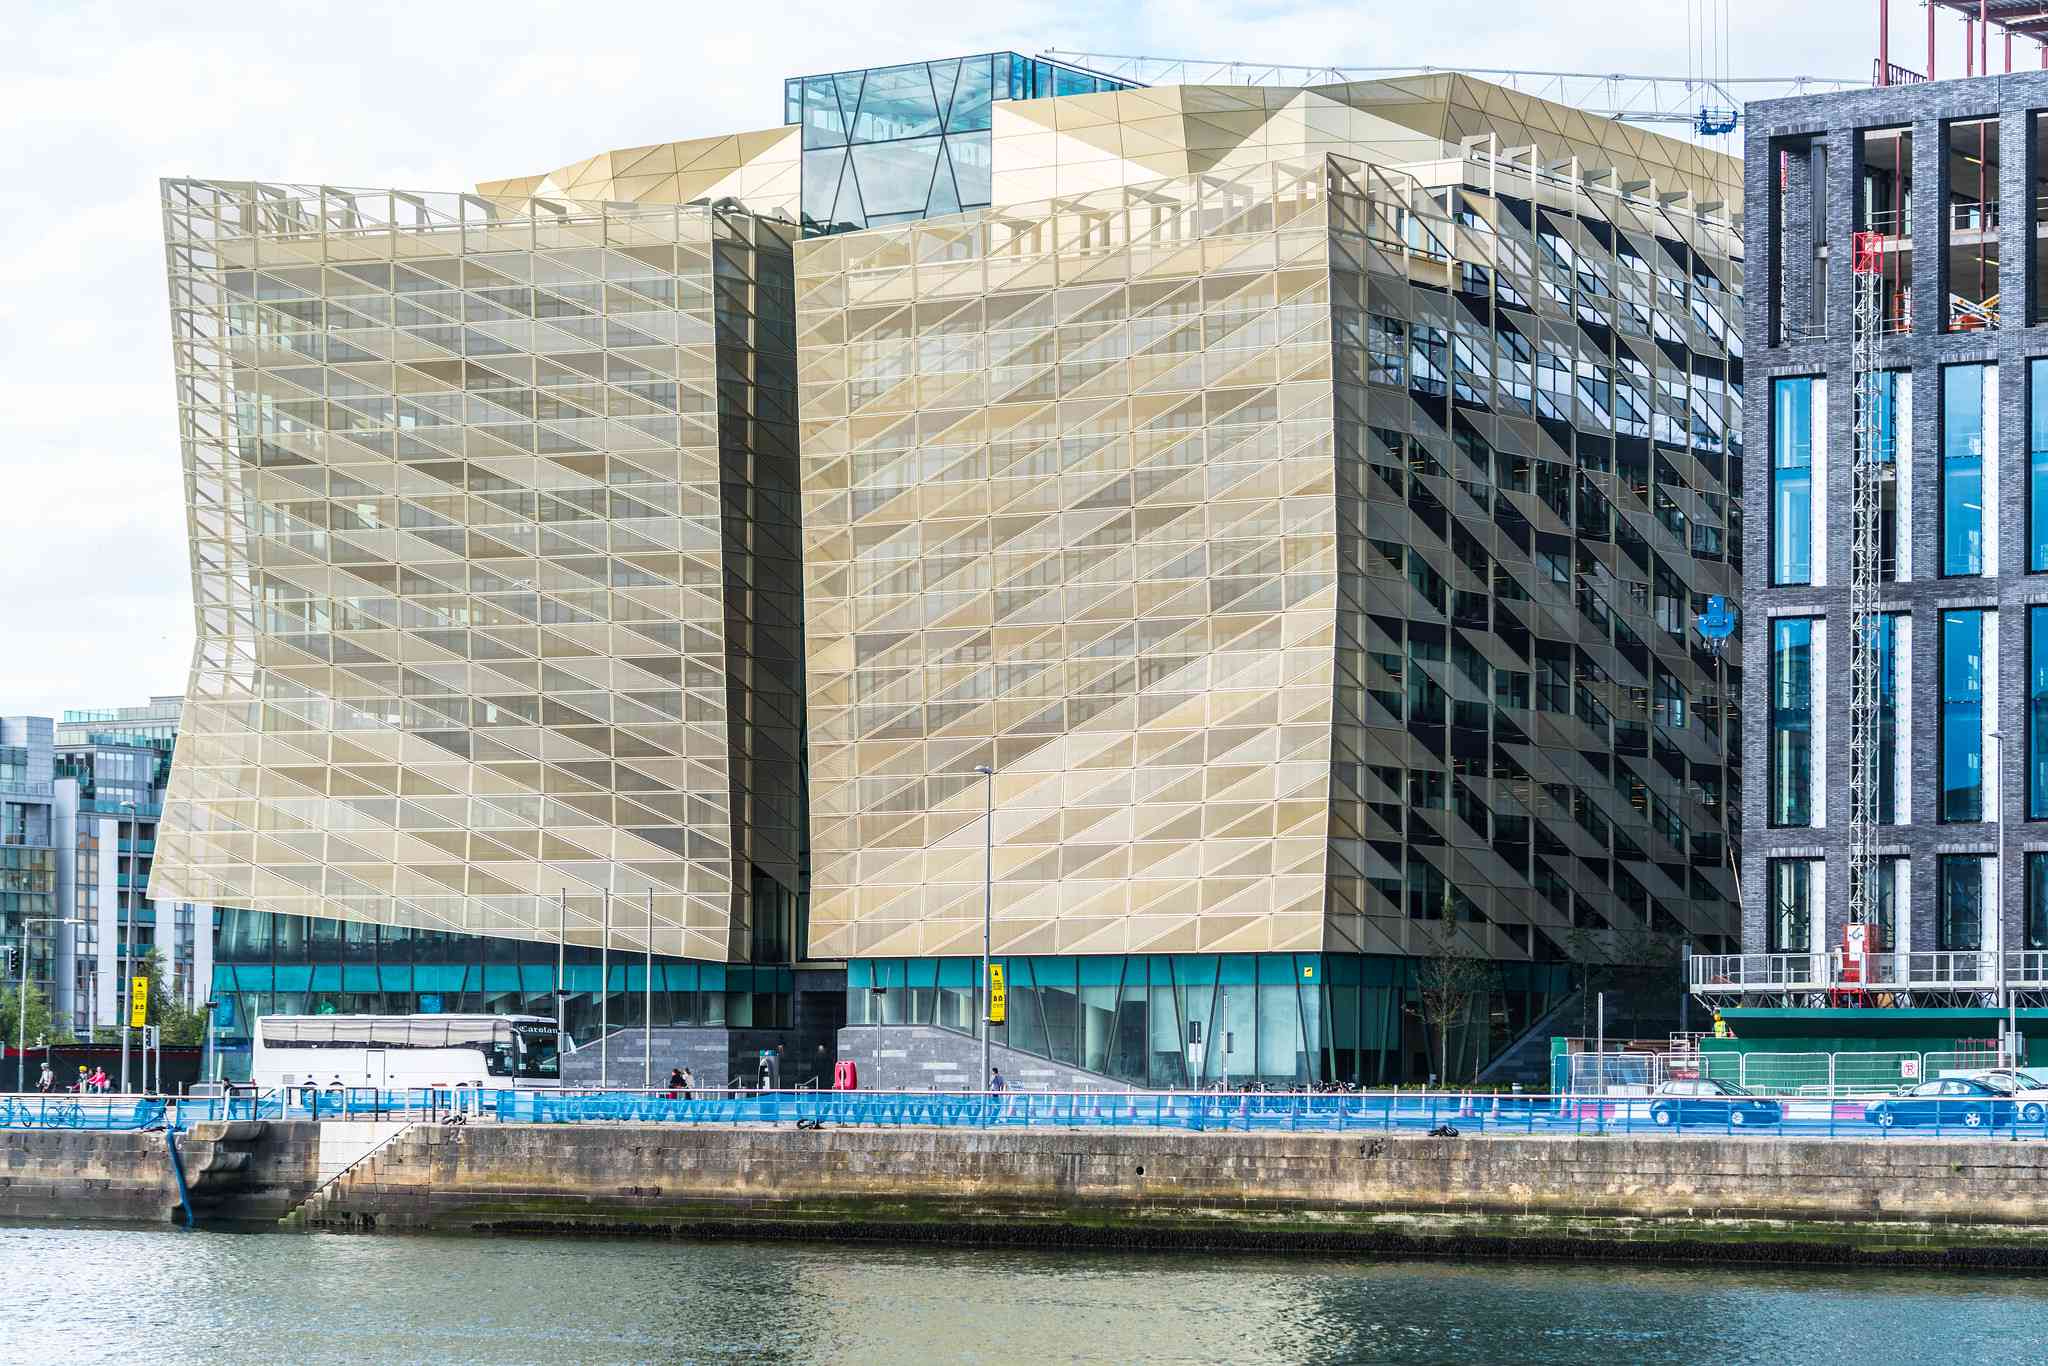 CENTRAL BANK OF IRELAND NEW HEADQUARTERS [NORTH WALL QUAY]-1324671